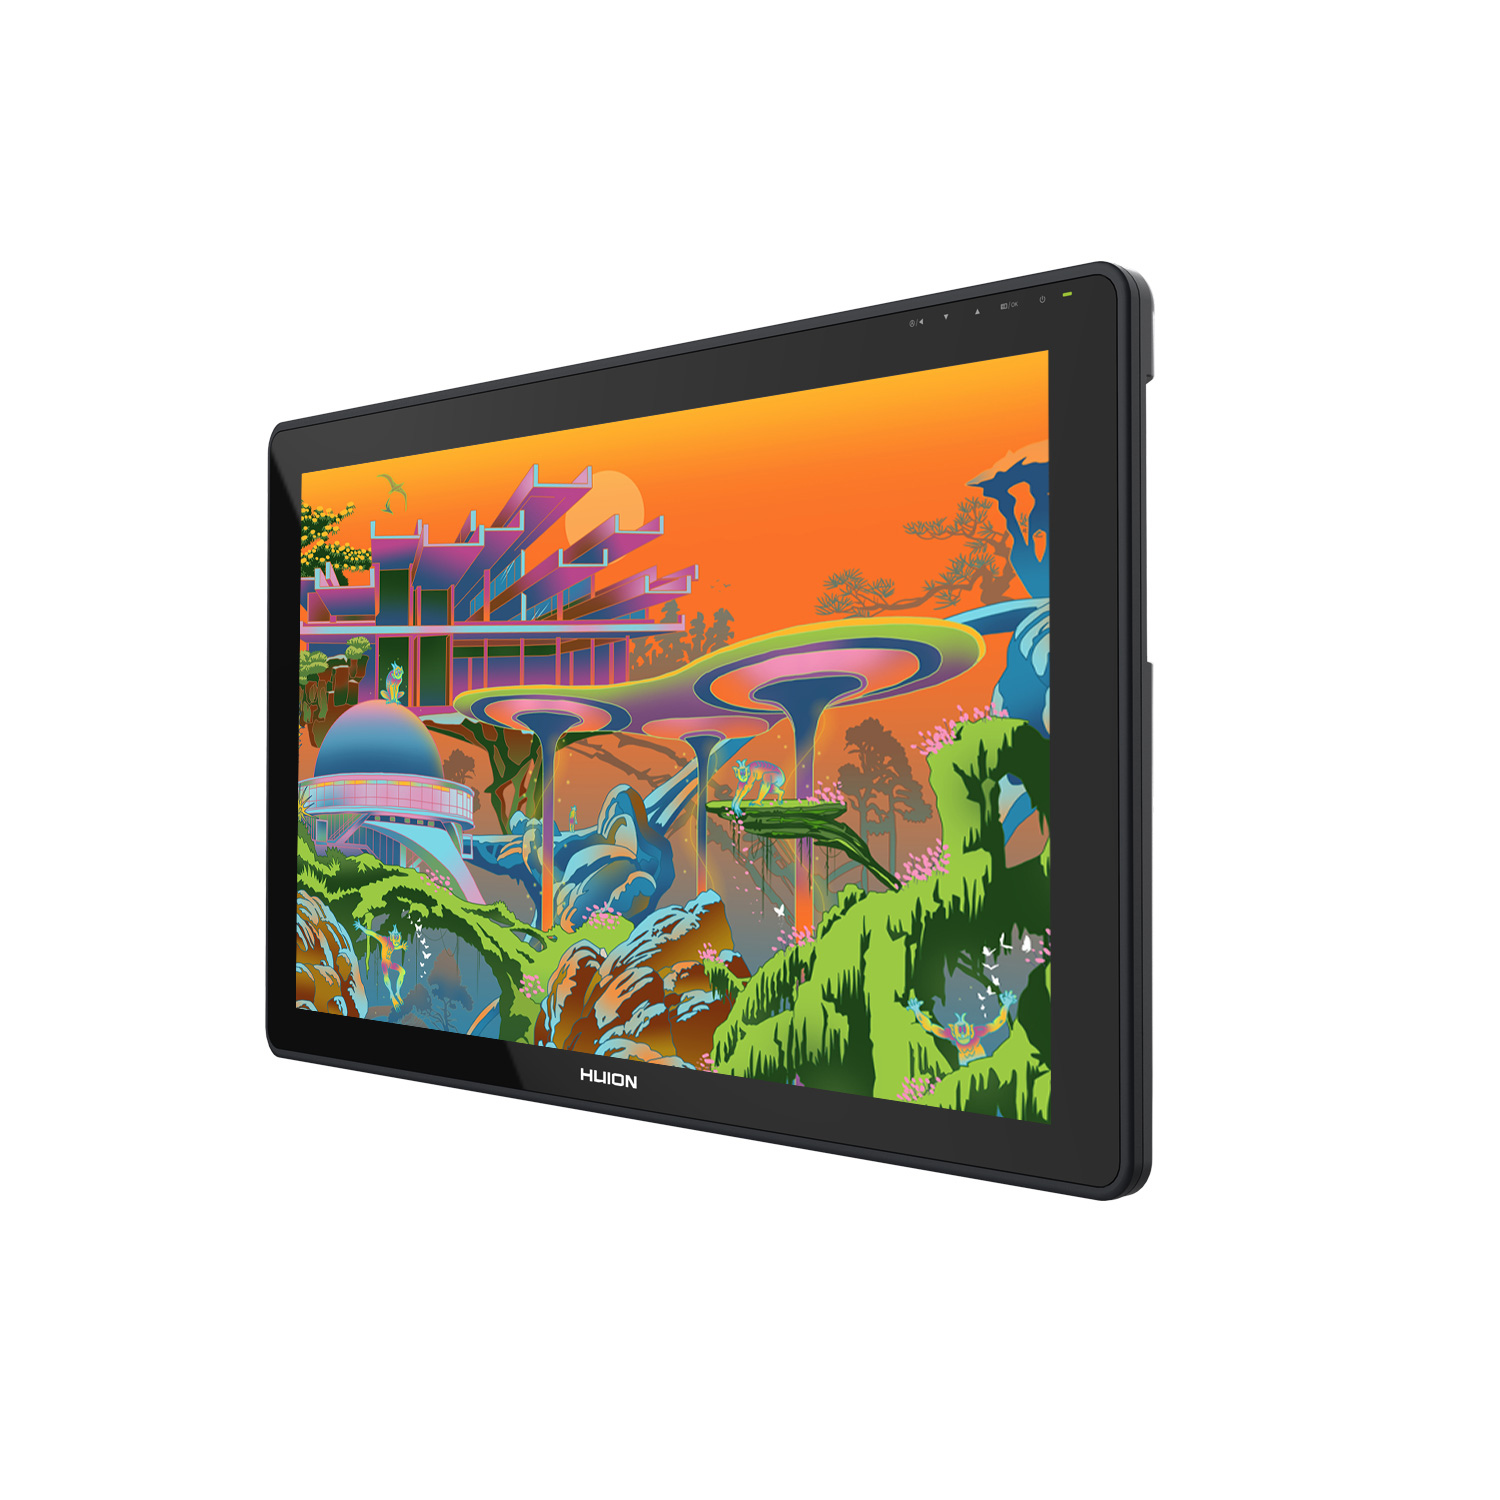 Kamvas 22 Series Drawing Monitor for Artists with Huion Keydial 